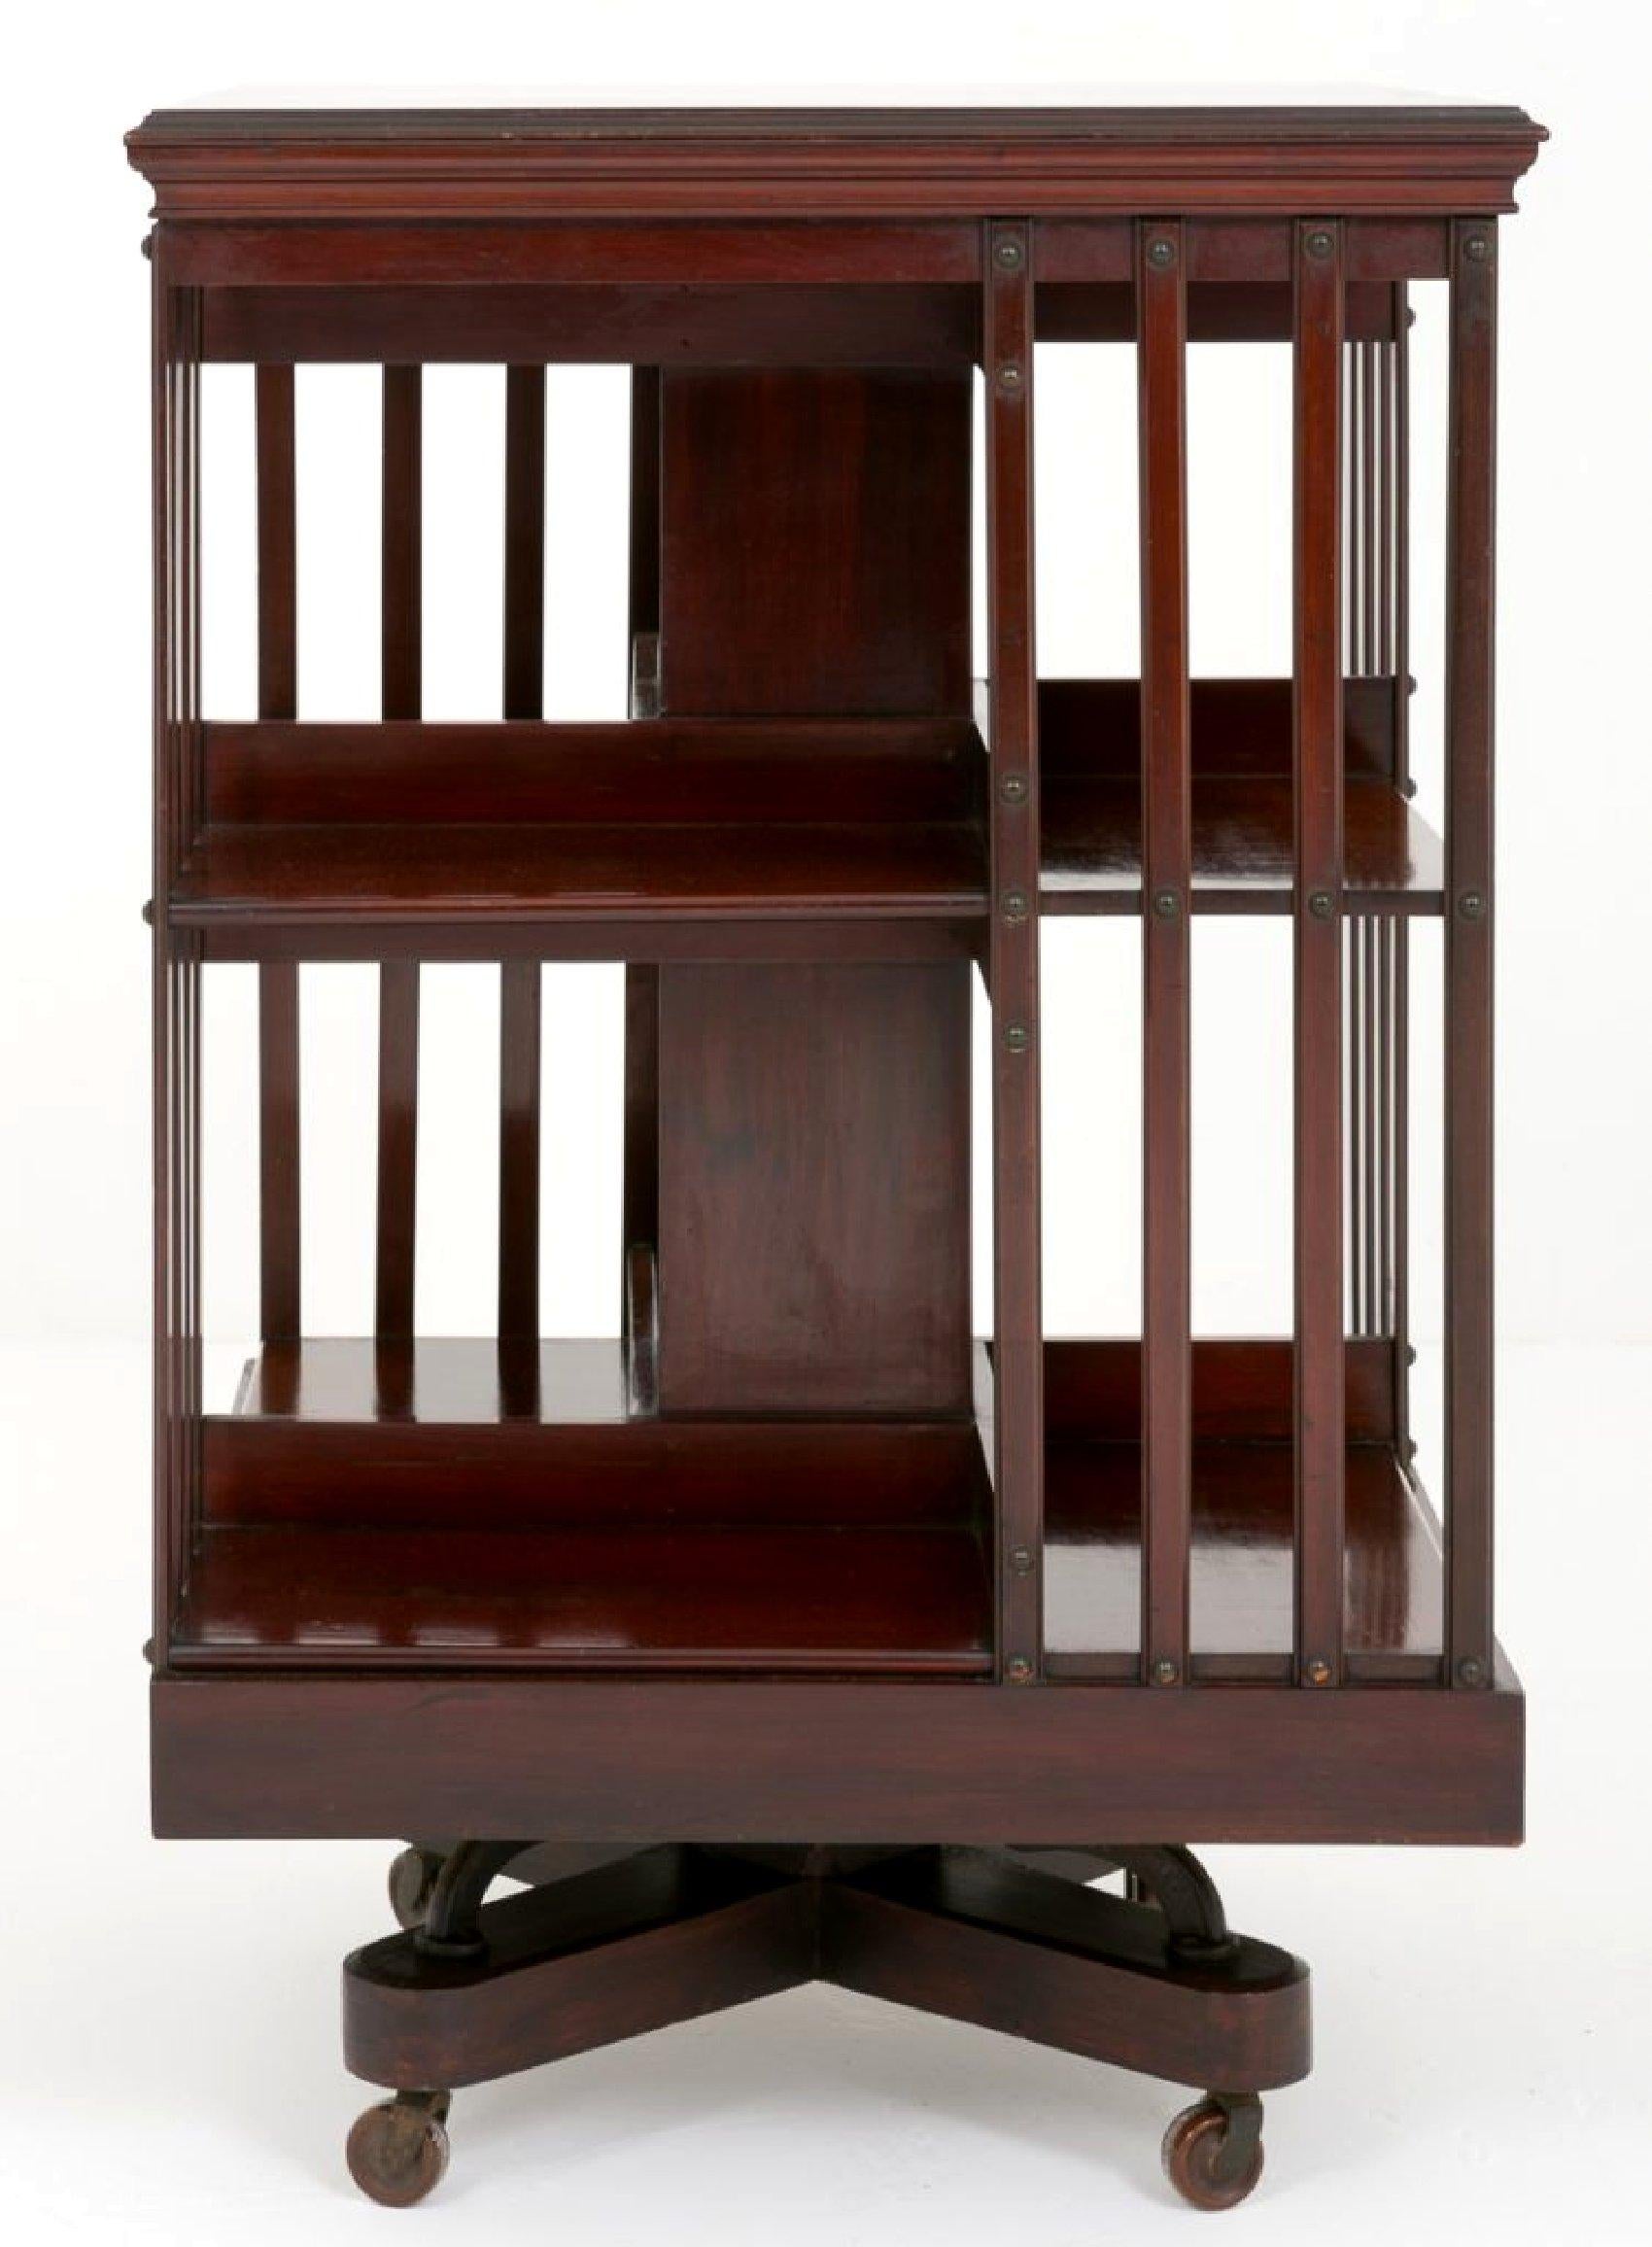 This outstanding 19th century mahogany squared side table features a central shelf with slat detailing on all 4 sides. The unit revolves and is supported on a short X-frame base and finished with porcelain castors. It would be ideal for a bookcase